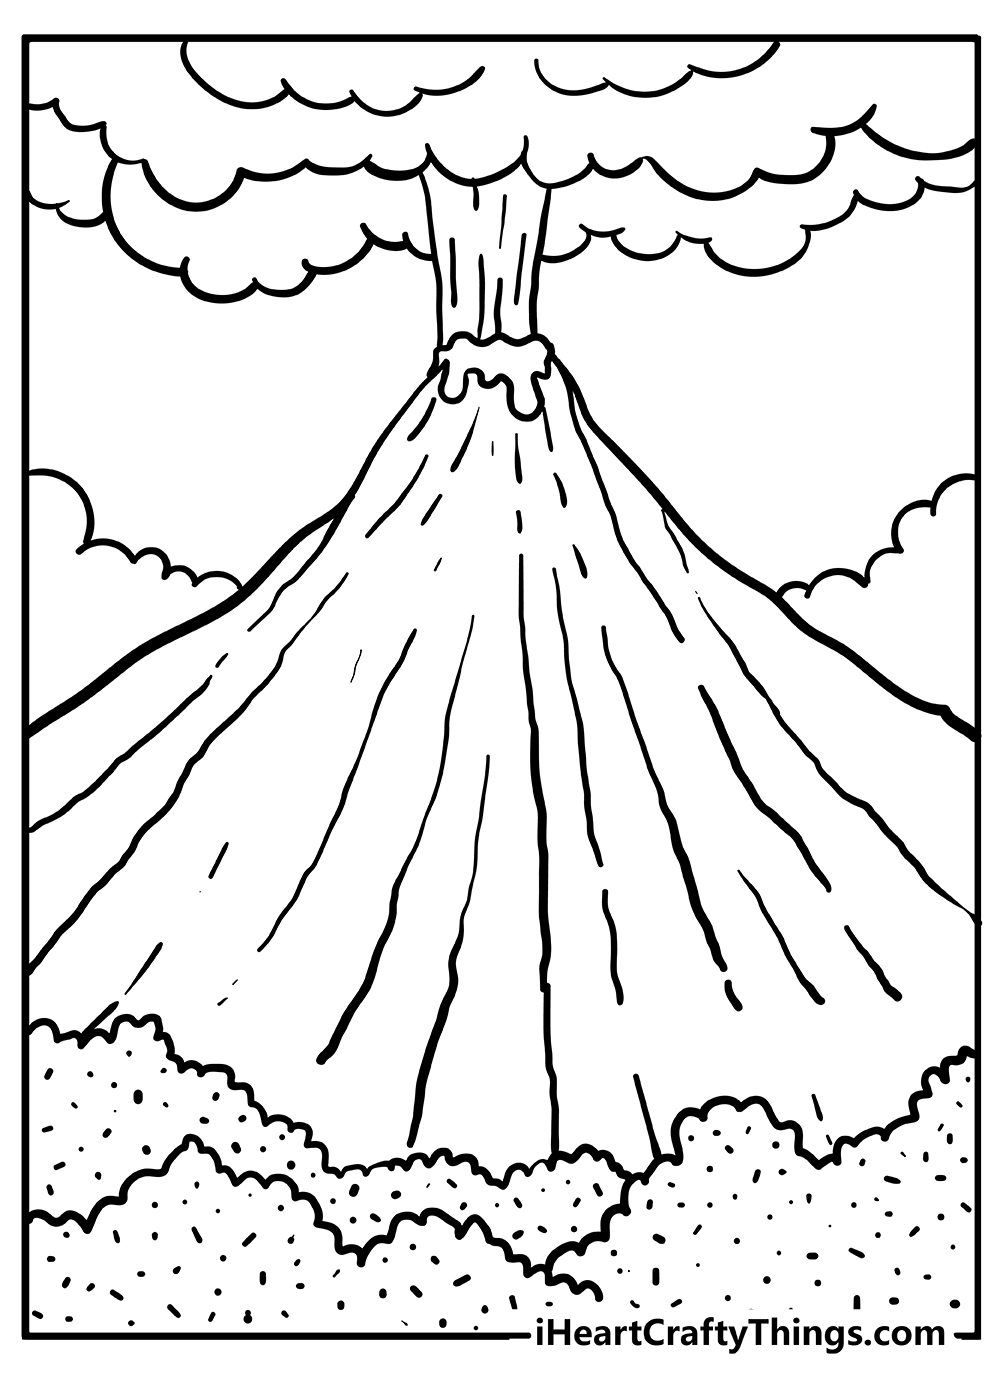 Volcano Coloring Sheet for children free download